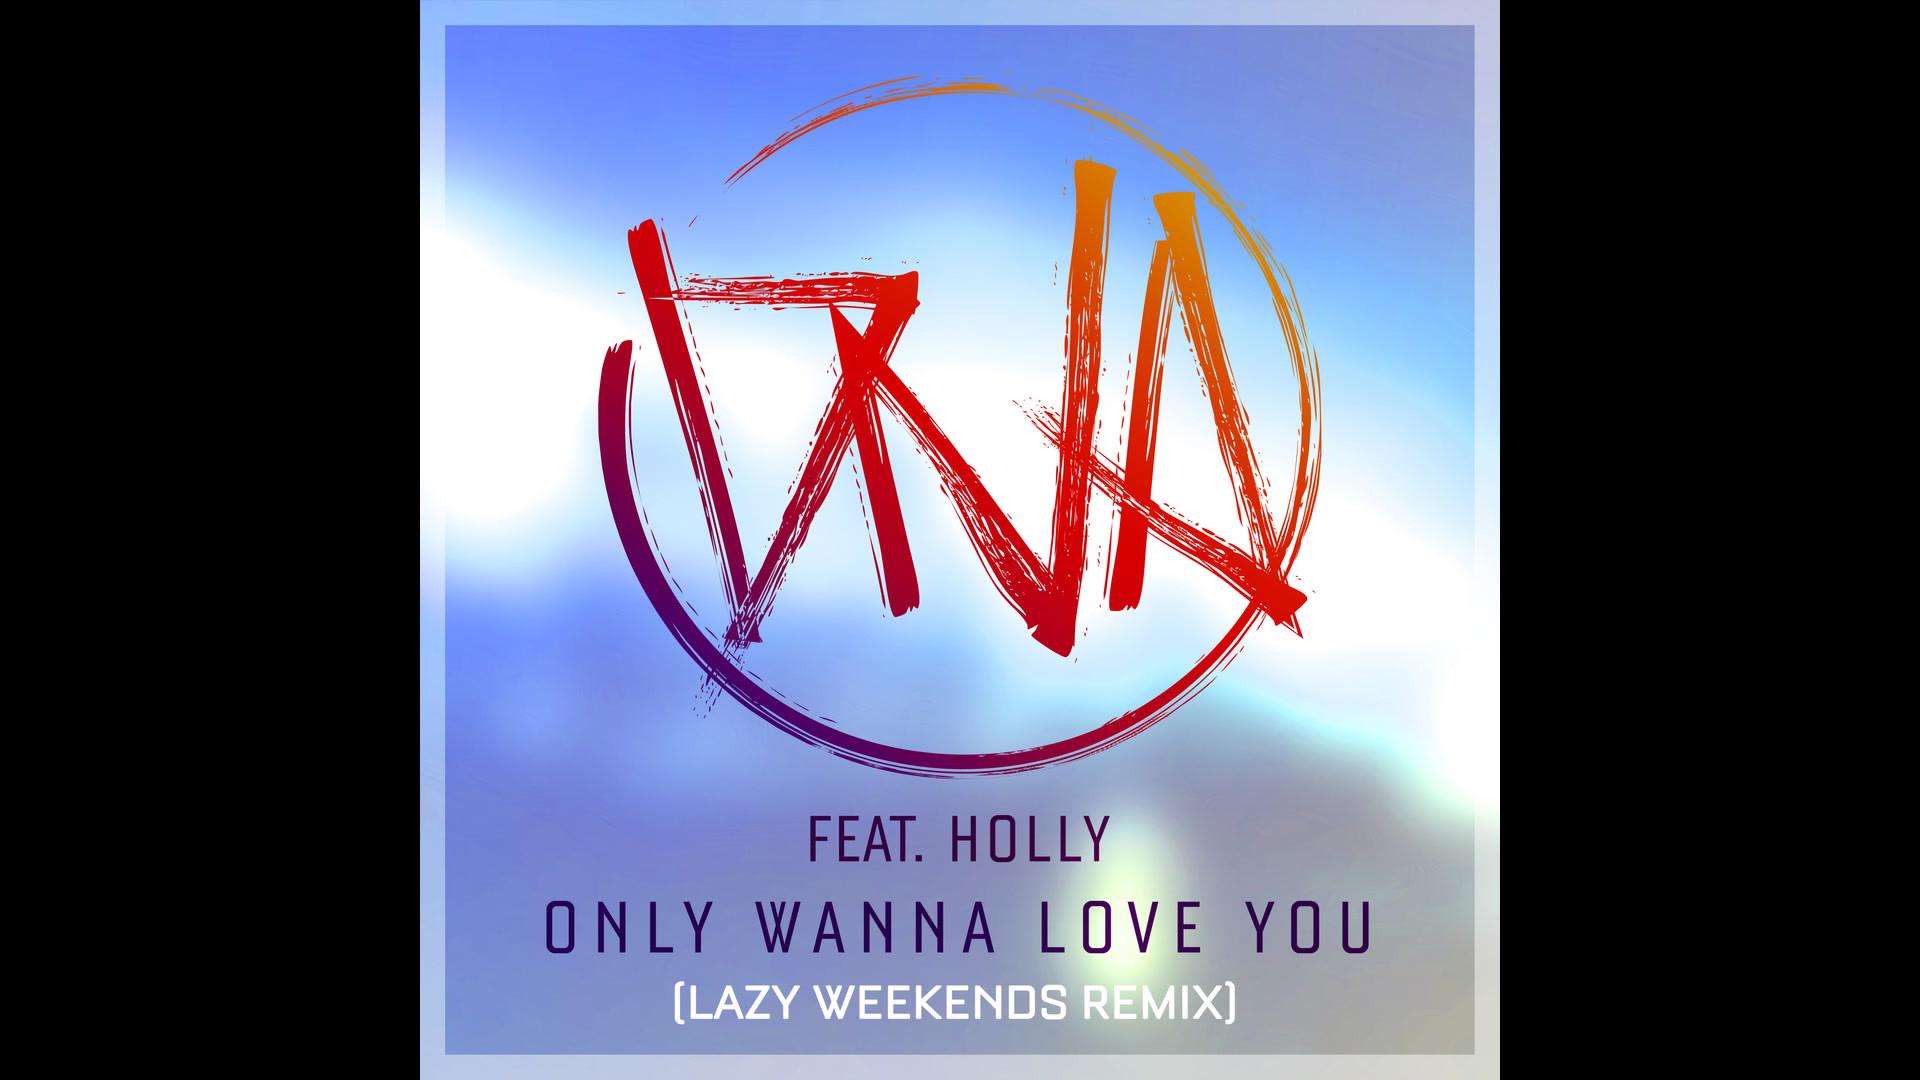 Dna - Only Wanna Love You (Lazy Weekends Remix) [Audio]